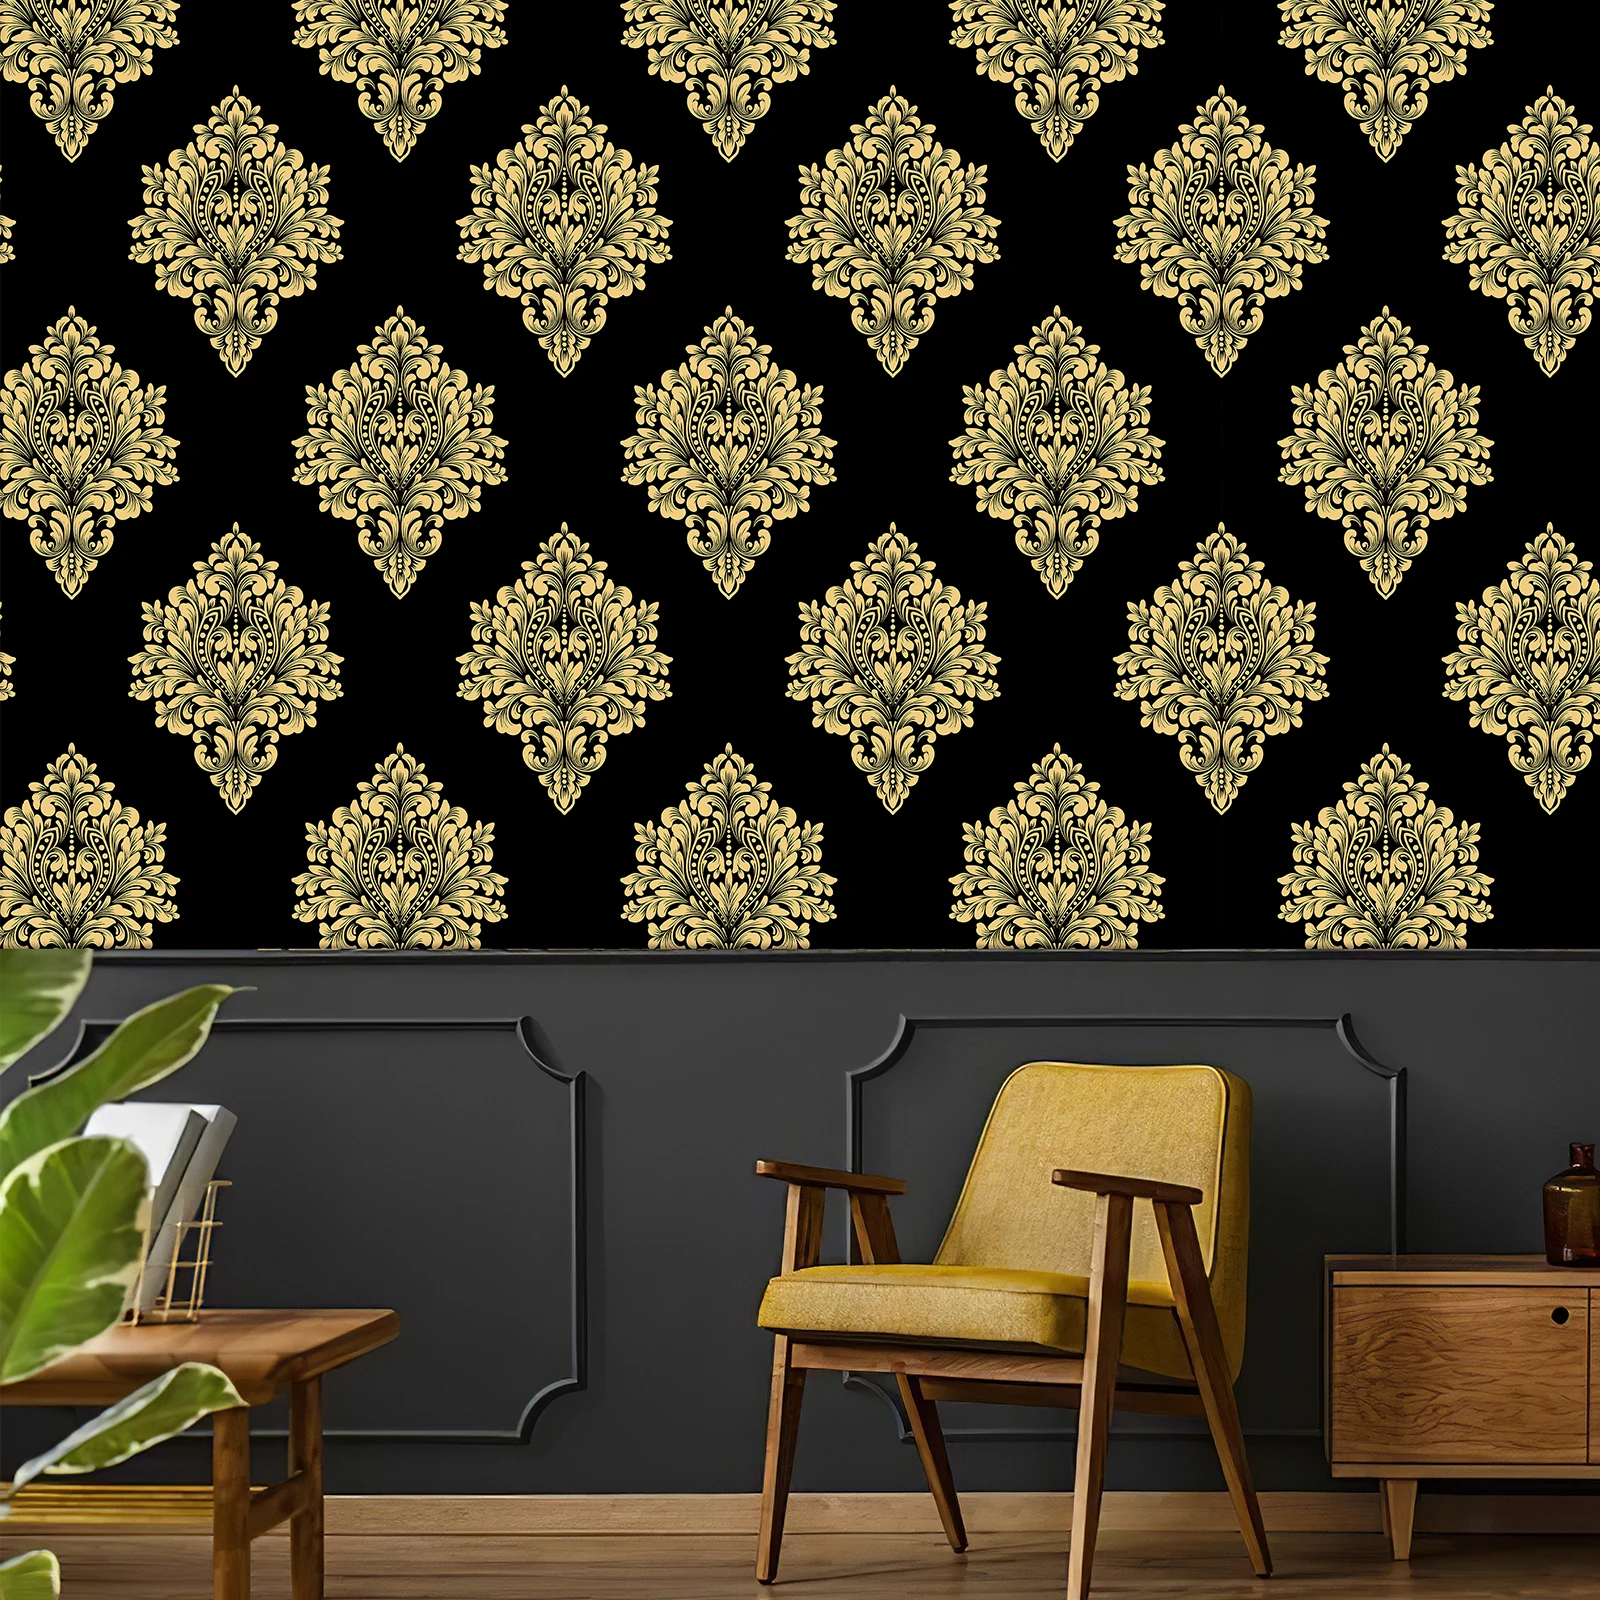 Retro Black Gold Damascus PVC Wallpaper Vintage Peel And Stick Vinyl Wall Decor Refrigerator Furniture Cabinet Sticker black gold luxury embossed texture 3d damask wallpaper for wall roll washable vinyl pvc european damascus wall paper red blue